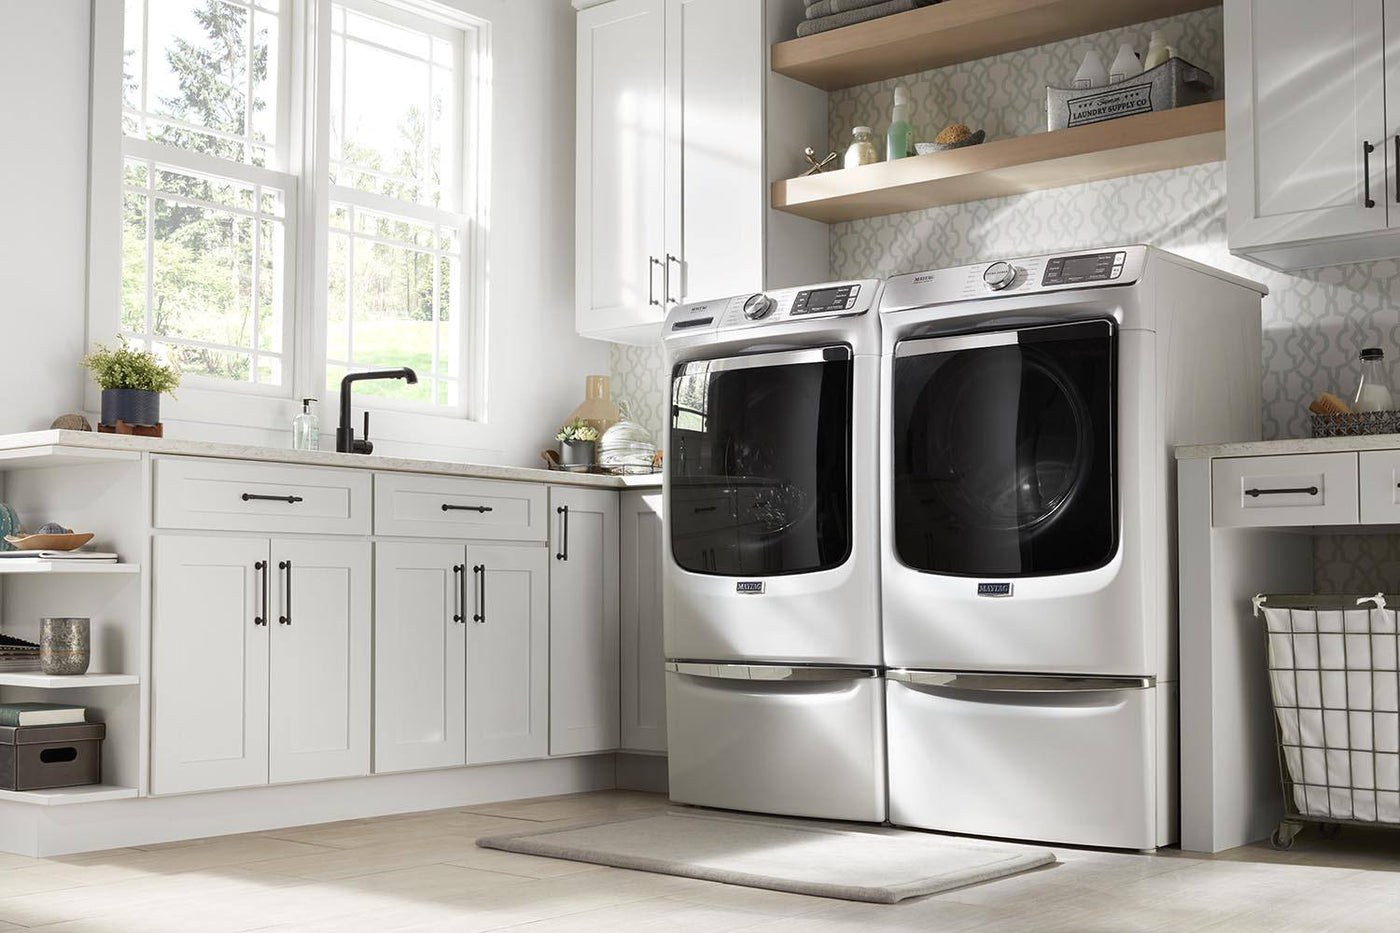 Maytag White Front-Load Washer (5.8 cu. ft.) & Electric Dryer (7.3 cu. ft.) - MHW8630HW/YMED8630HW